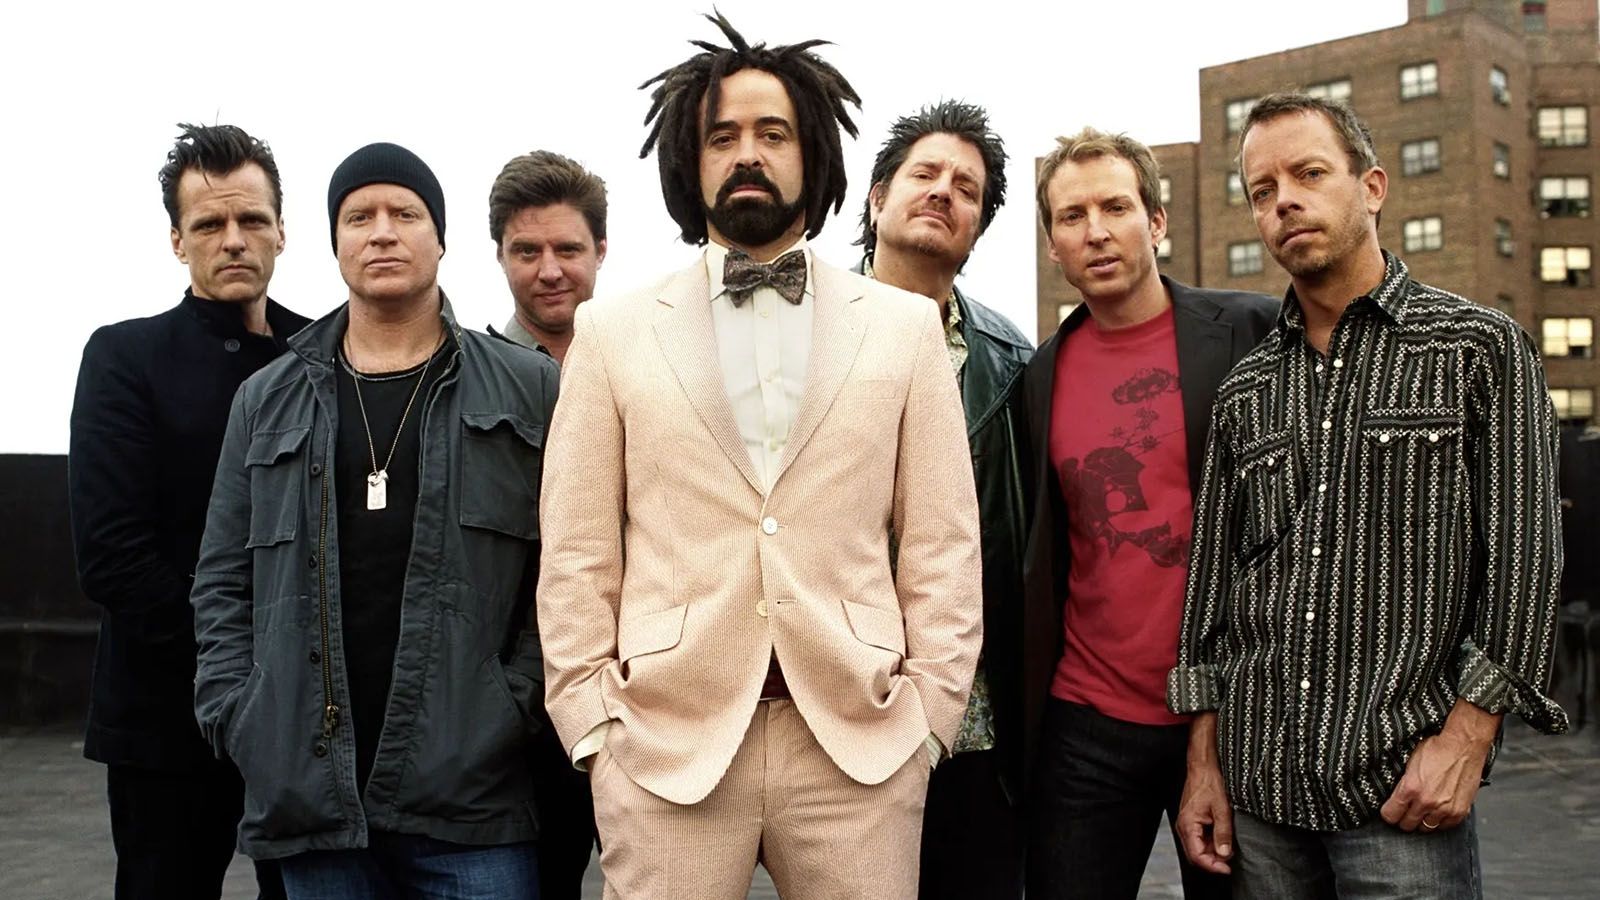 Counting Crows will be joined by Dashboard Confessional during a summer tour.